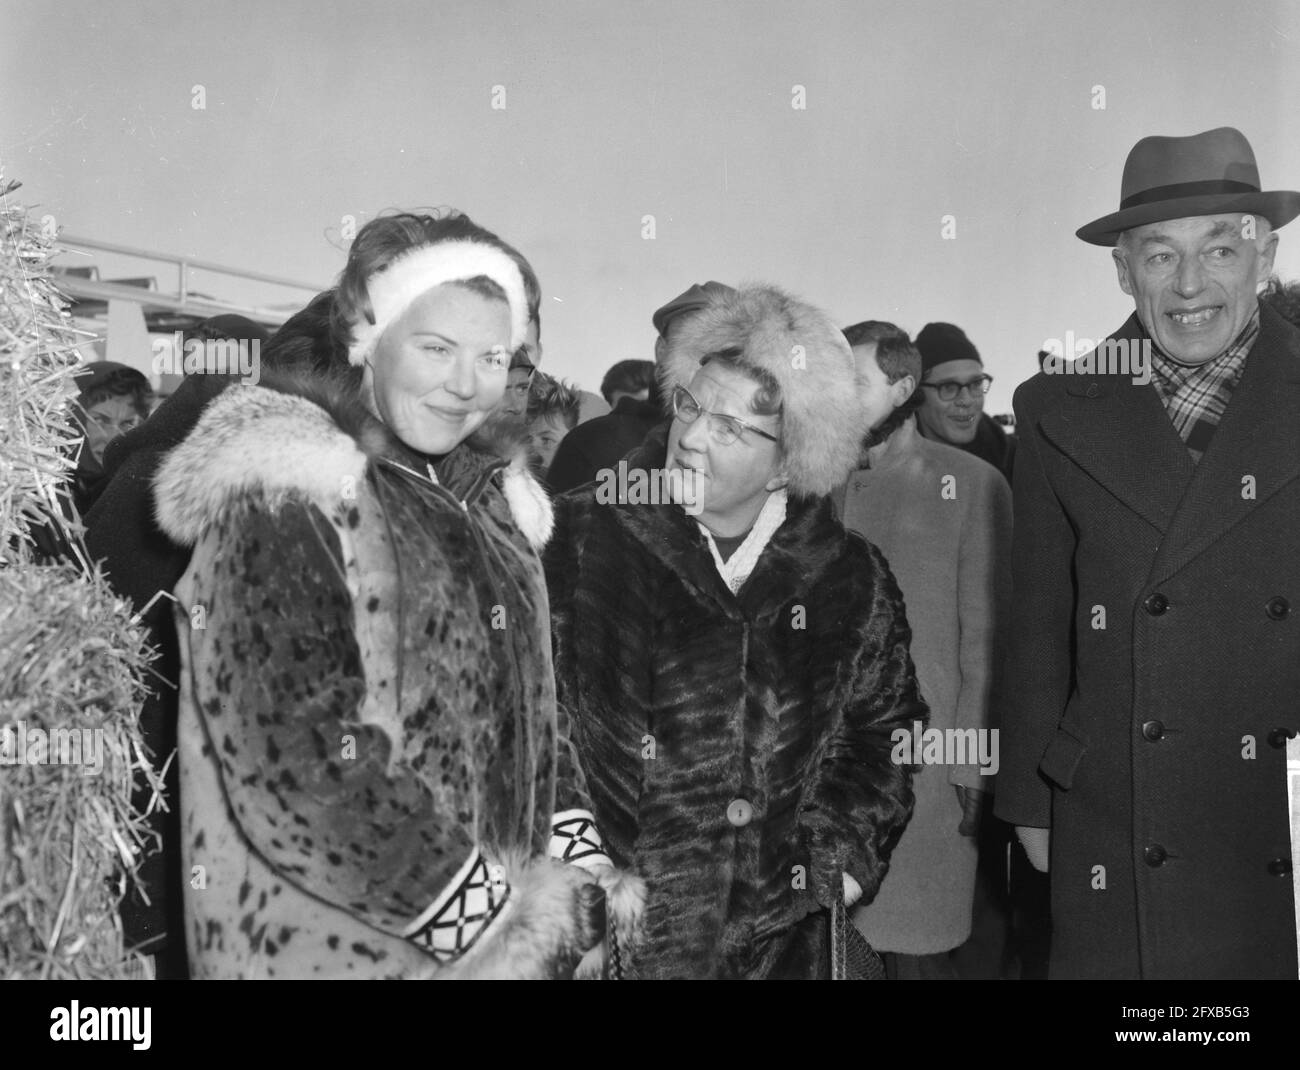 Elfstedentocht 1963. Queen Juliana and Princess Beatrix at the finish in Leeuwarden, January 18, 1963, royal family, skating, sport, spectators, The Netherlands, 20th century press agency photo, news to remember, documentary, historic photography 1945-1990, visual stories, human history of the Twentieth Century, capturing moments in time Stock Photo